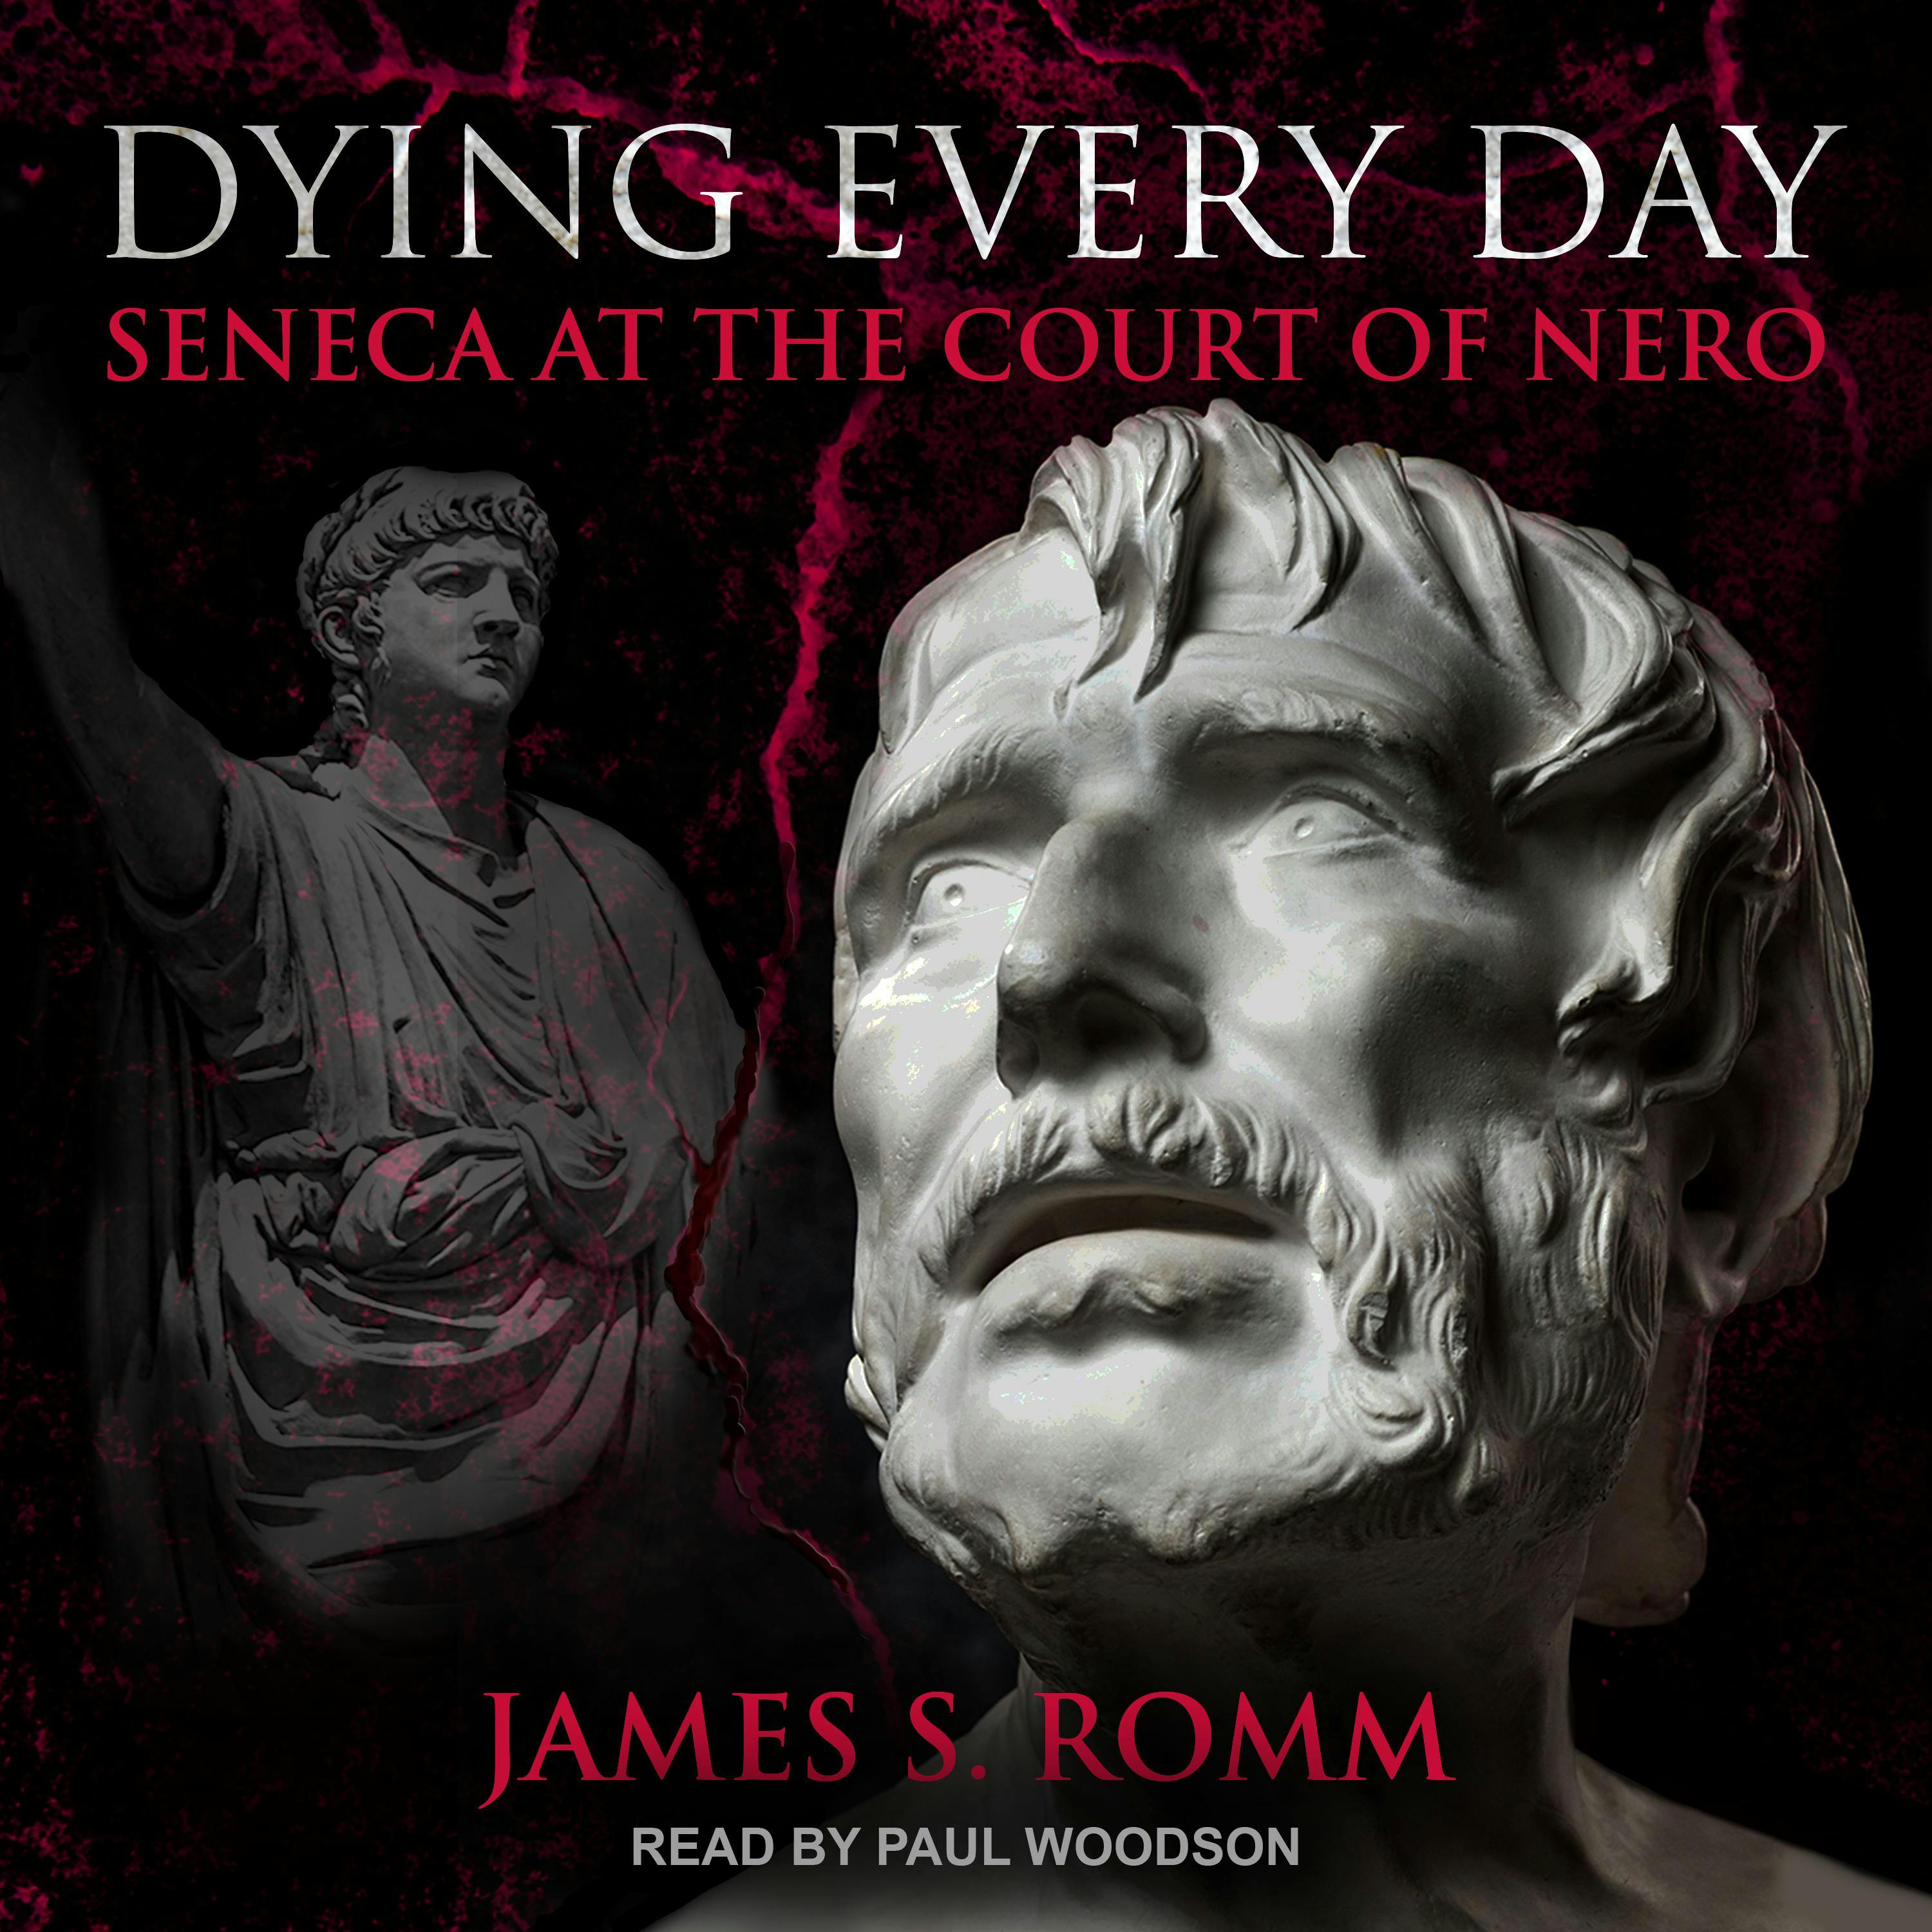 Dying Every Day: Seneca at the Court of Nero - James S. Romm